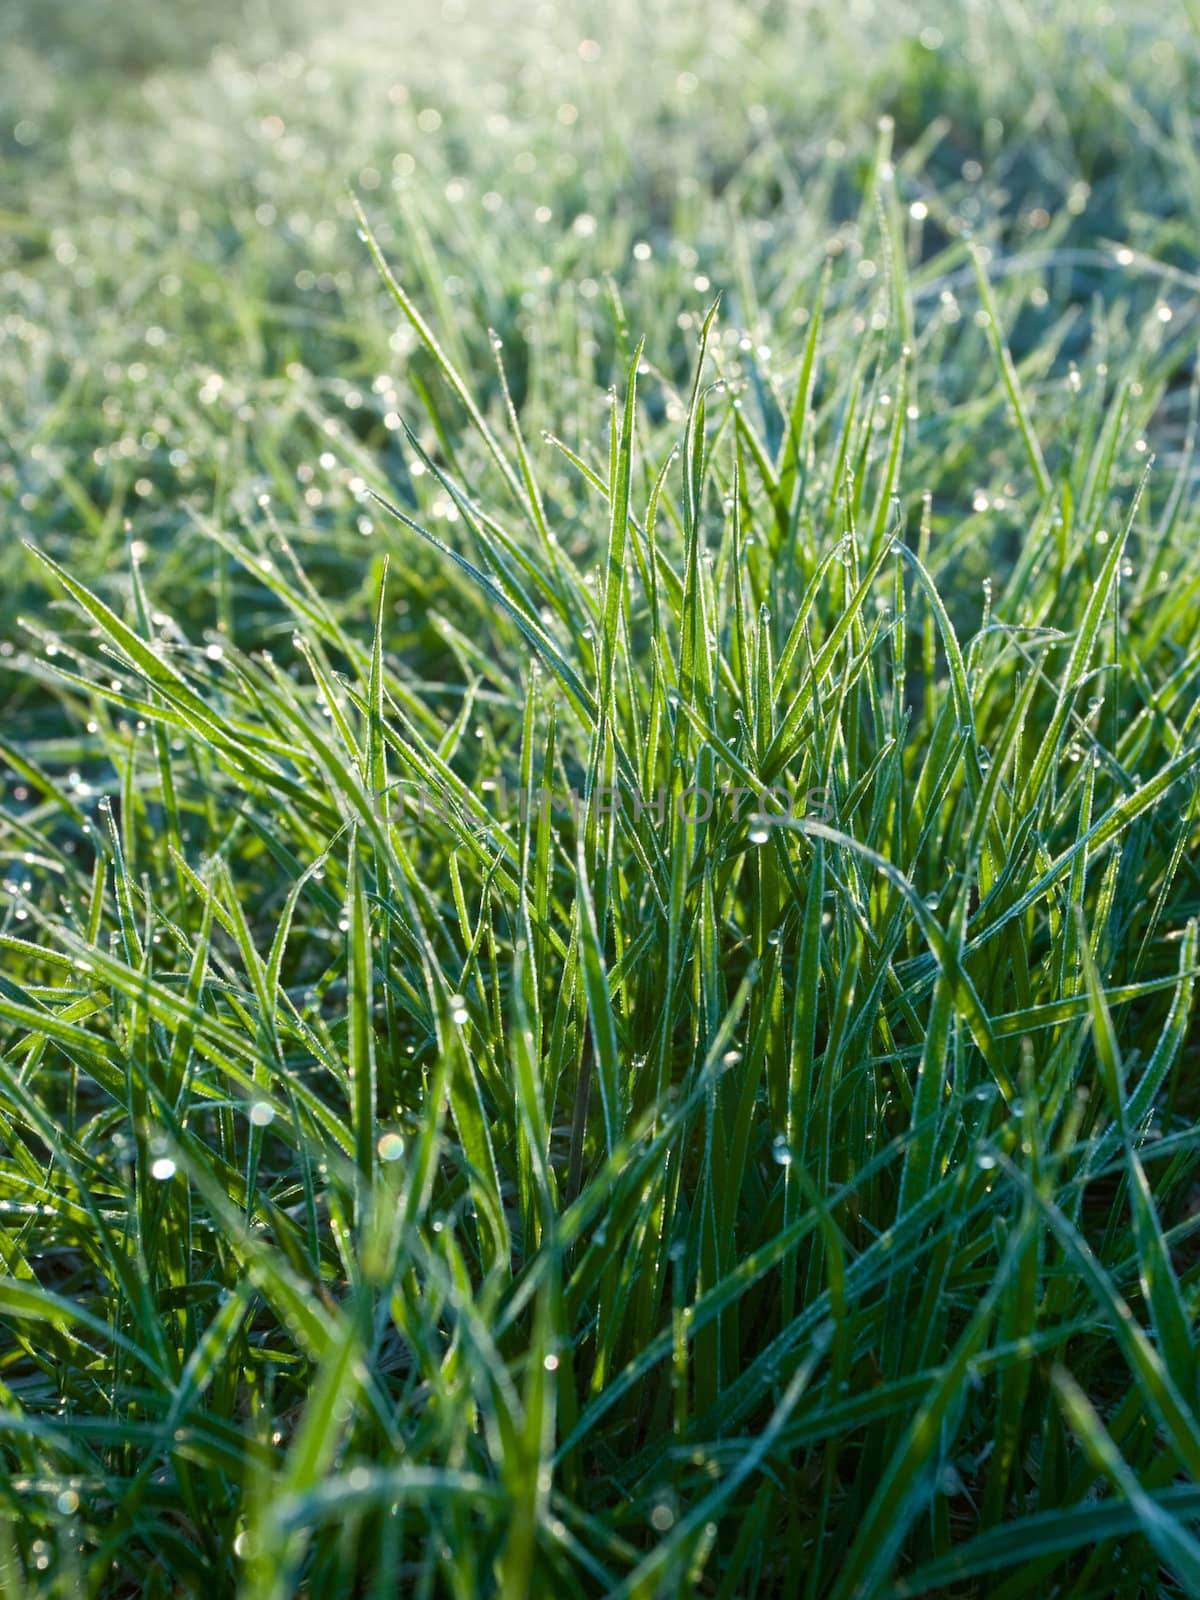 Grass with rime and dew drops in a morning light, selective focus